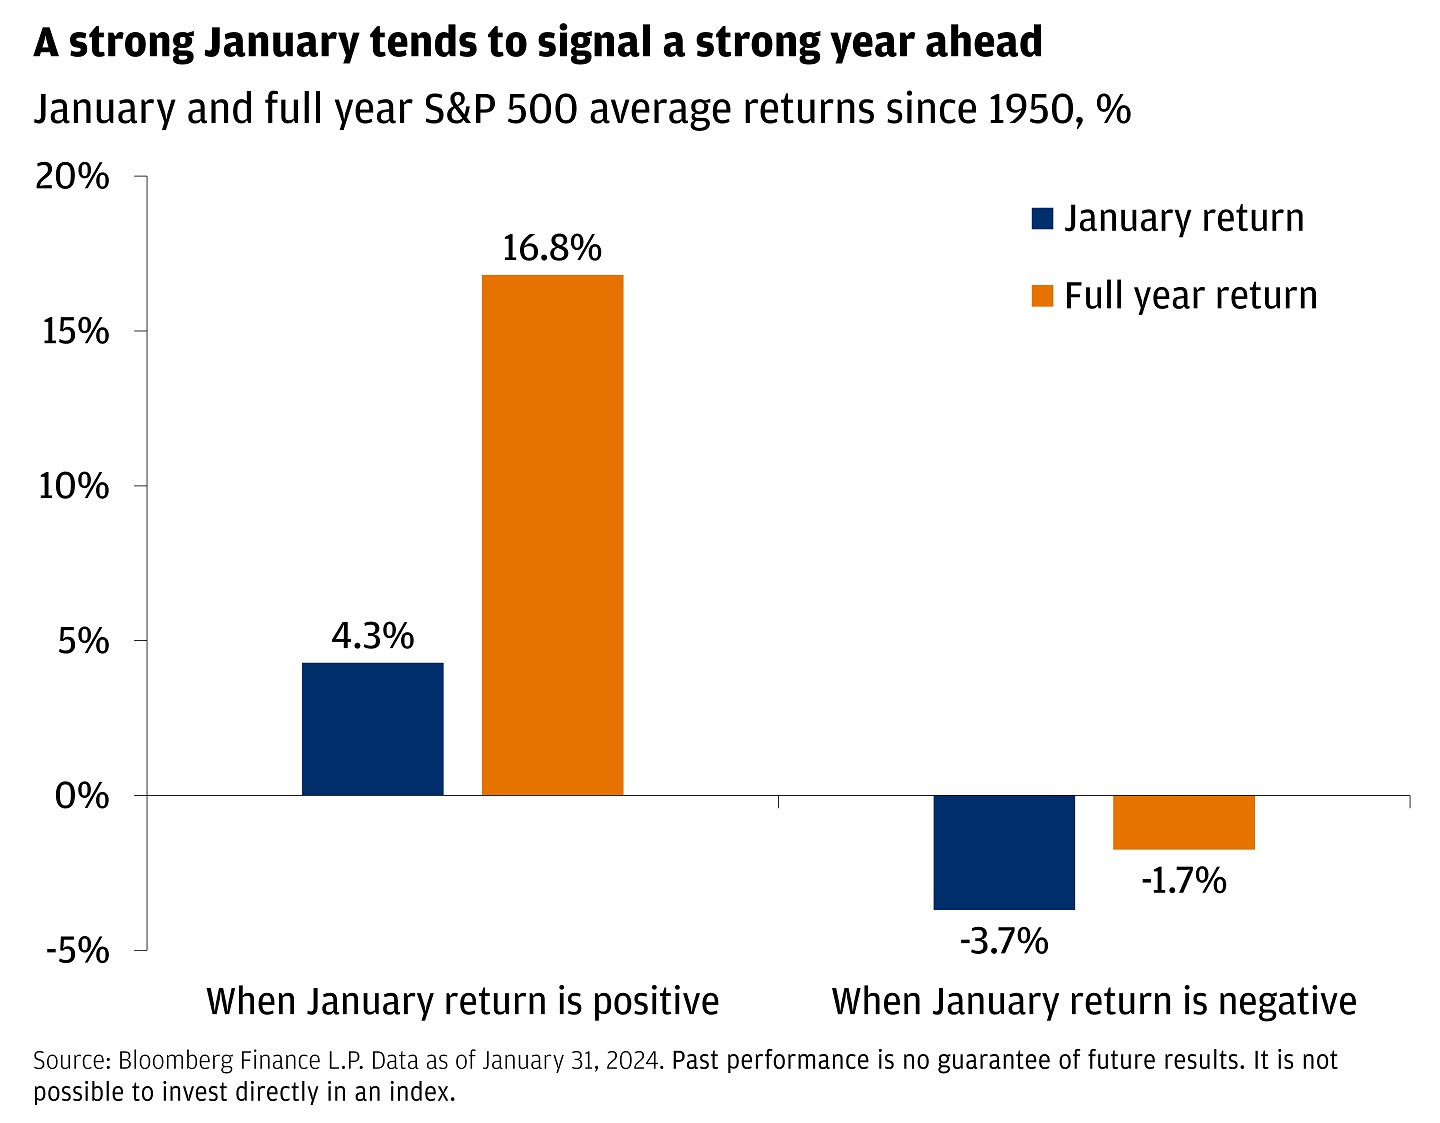 This bar chart shows the January and full year S&P 500 average return since 1950 in percent.